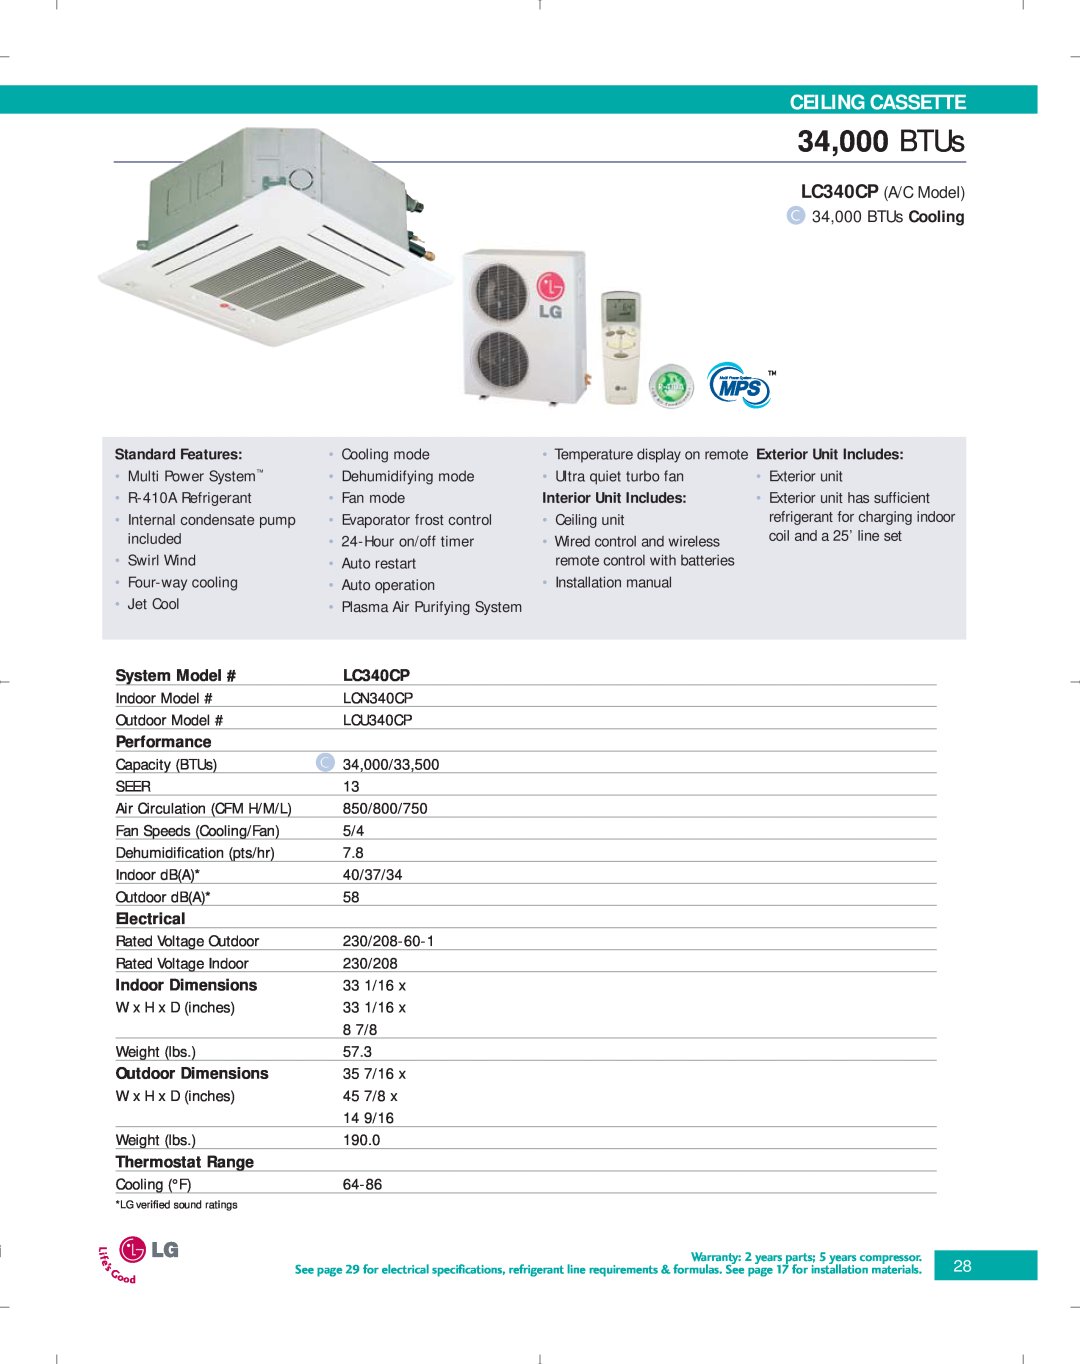 LG Electronics PG-100-2006-VER3 manual 34,000 BTUs, LC340CP, Ceiling Cassette, System Model #, Performance, Electrical 